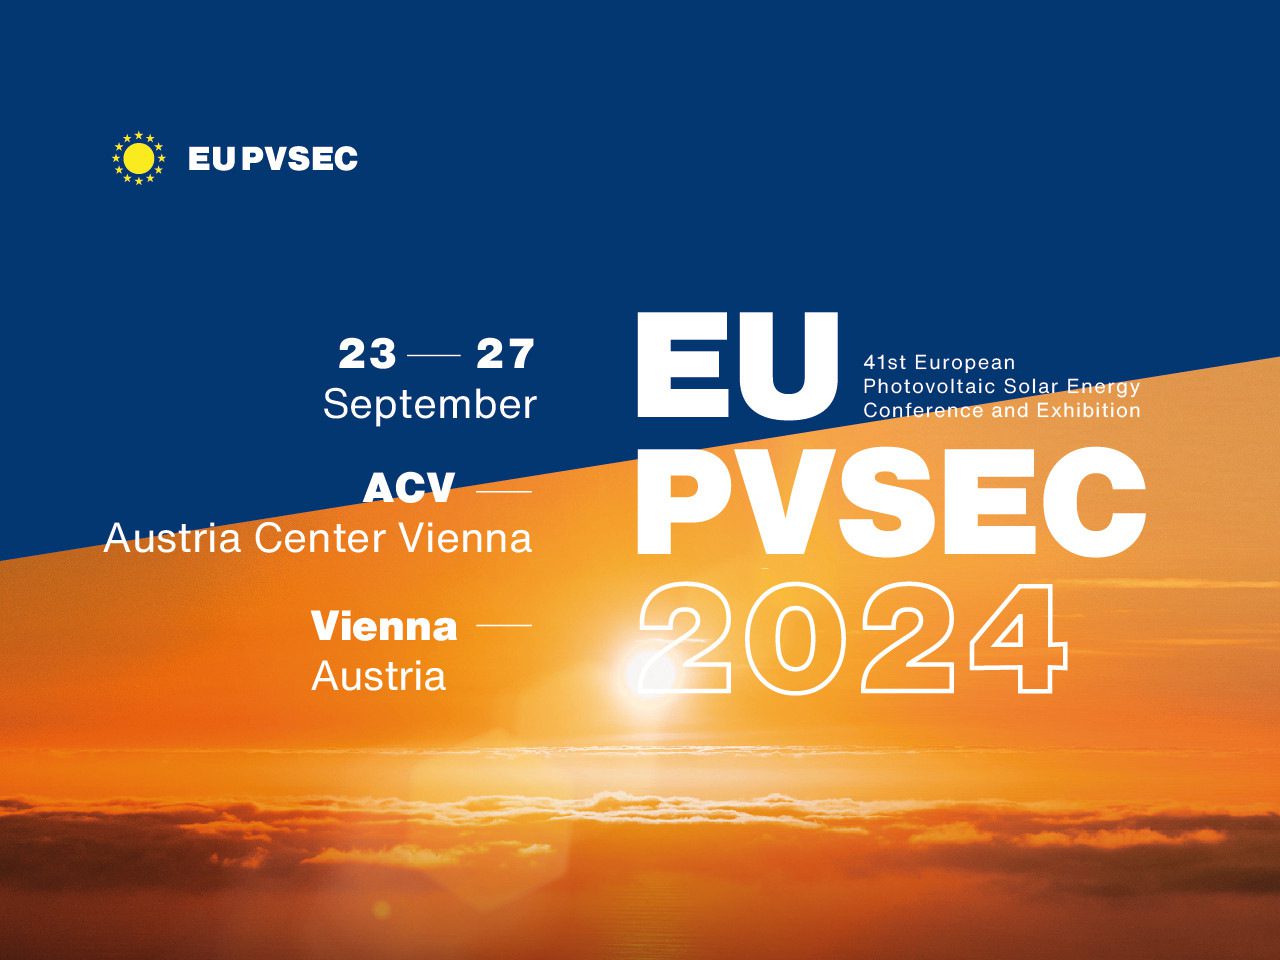 A platform for PV innovation in the heart of Europe